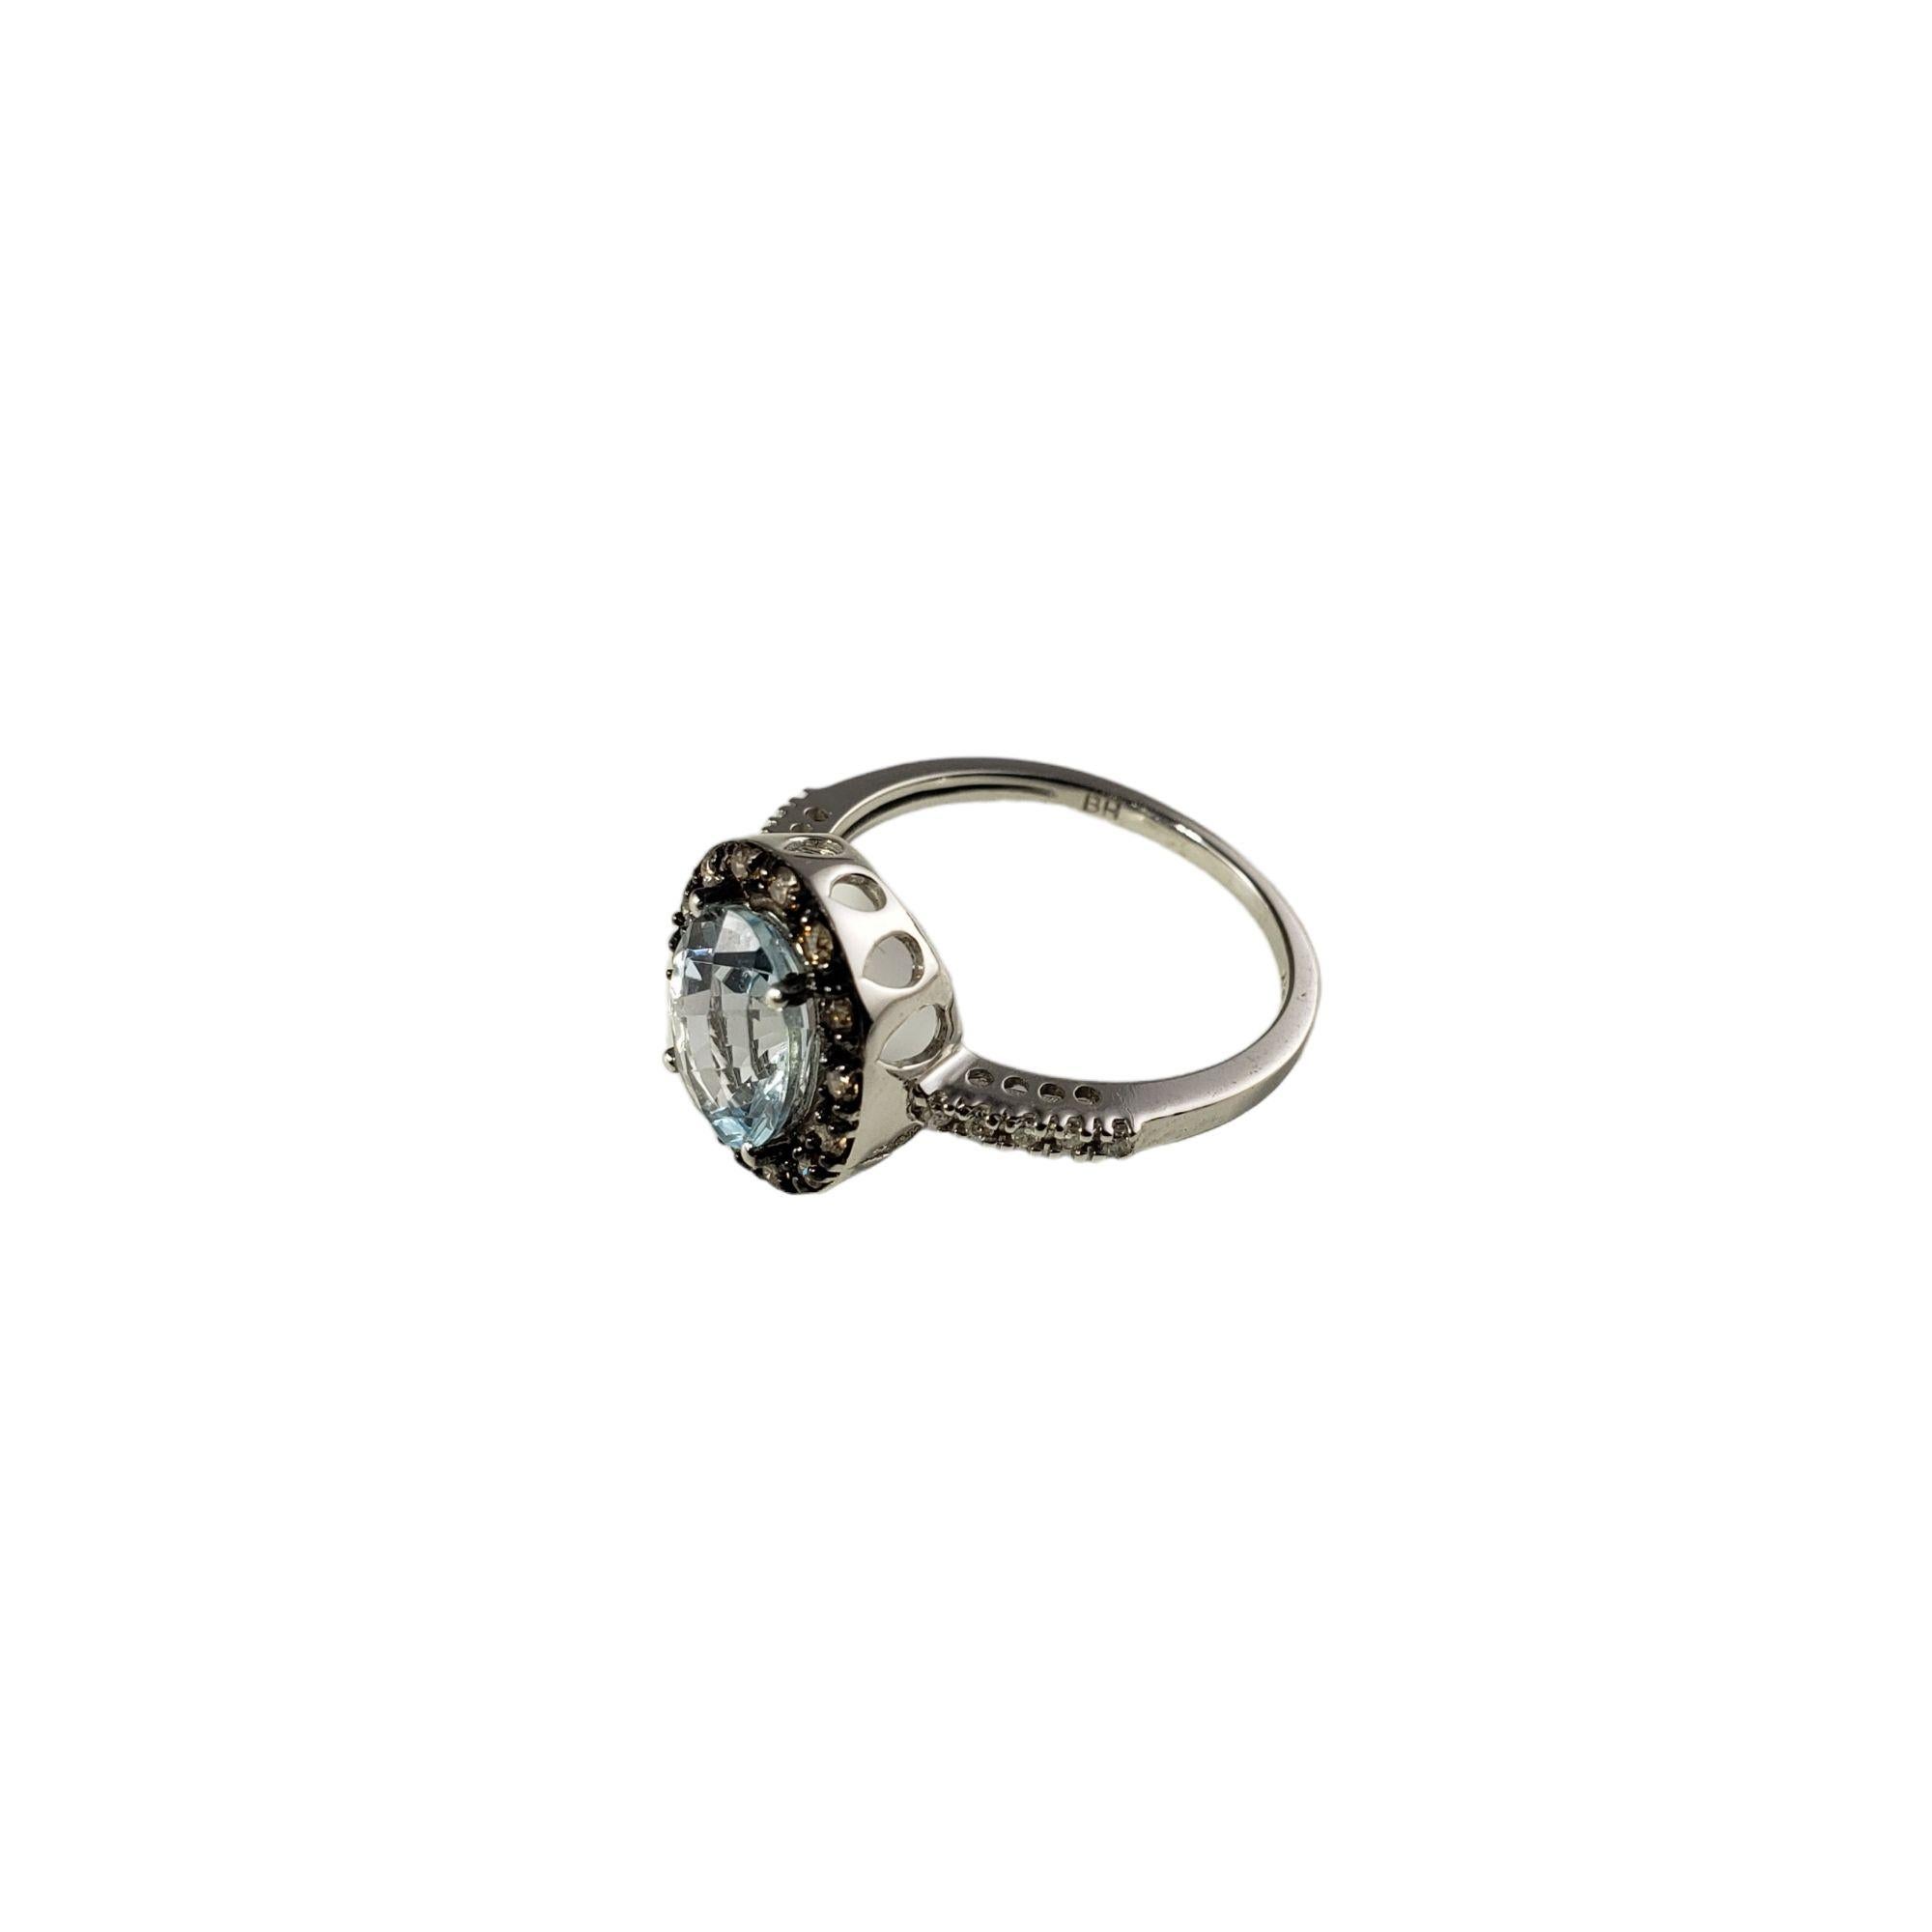 Vintage 14 Karat White Gold Aquamarine and Diamond Ring Size 7.25 JAGi Certified-

This stunning ring features one checkerboard oval cut aquamarine (9 mm x 7 mm) and 24 round brilliant and single cut diamonds set in classic 14K white gold. Width: 12